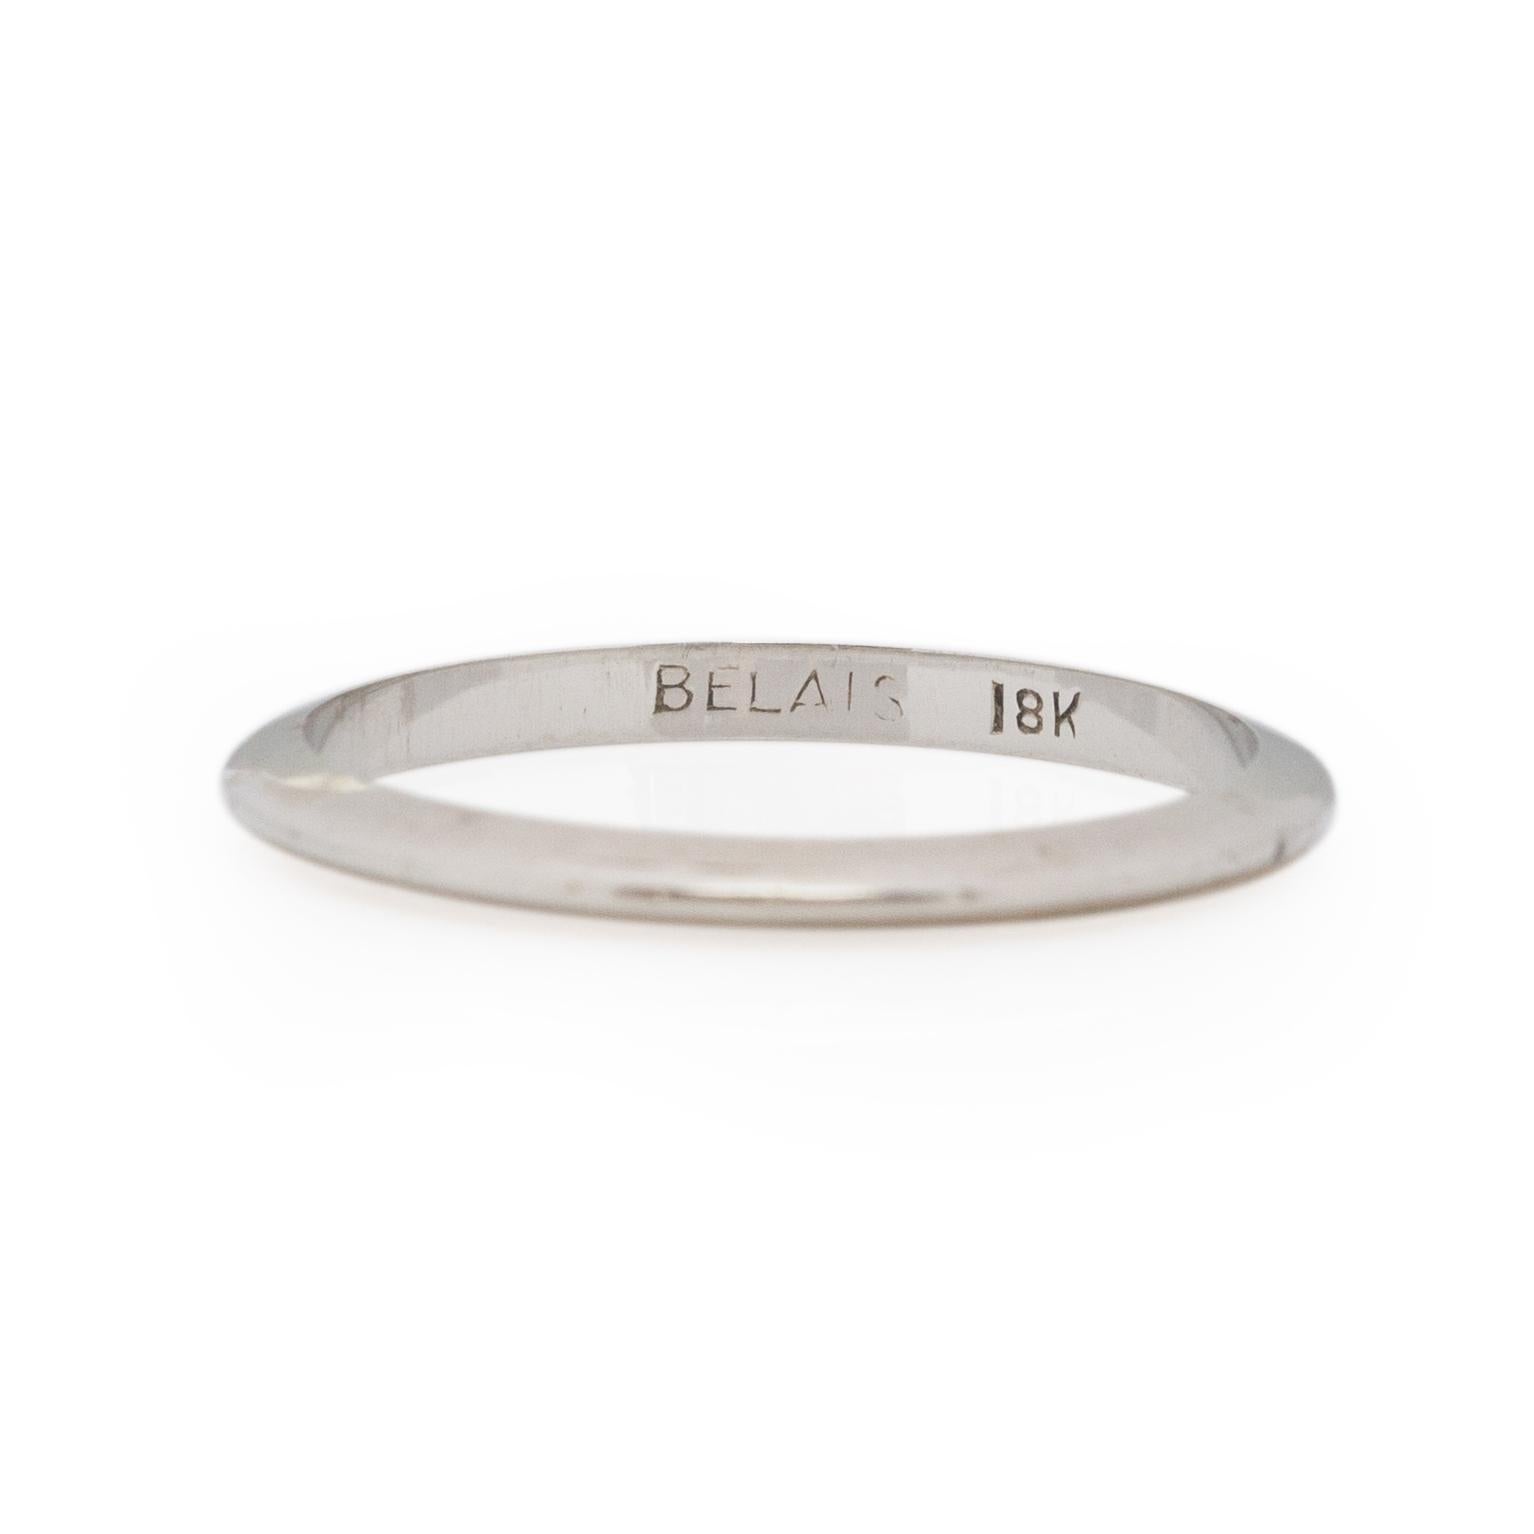 Here we have a simple thin knife edge Belais Bros wedding band. This piece has a great minimalist feel and is in wonderful condition for its age. This ring is very versatile, by means of who it is worn by and how. A beautiful addition to a vintage